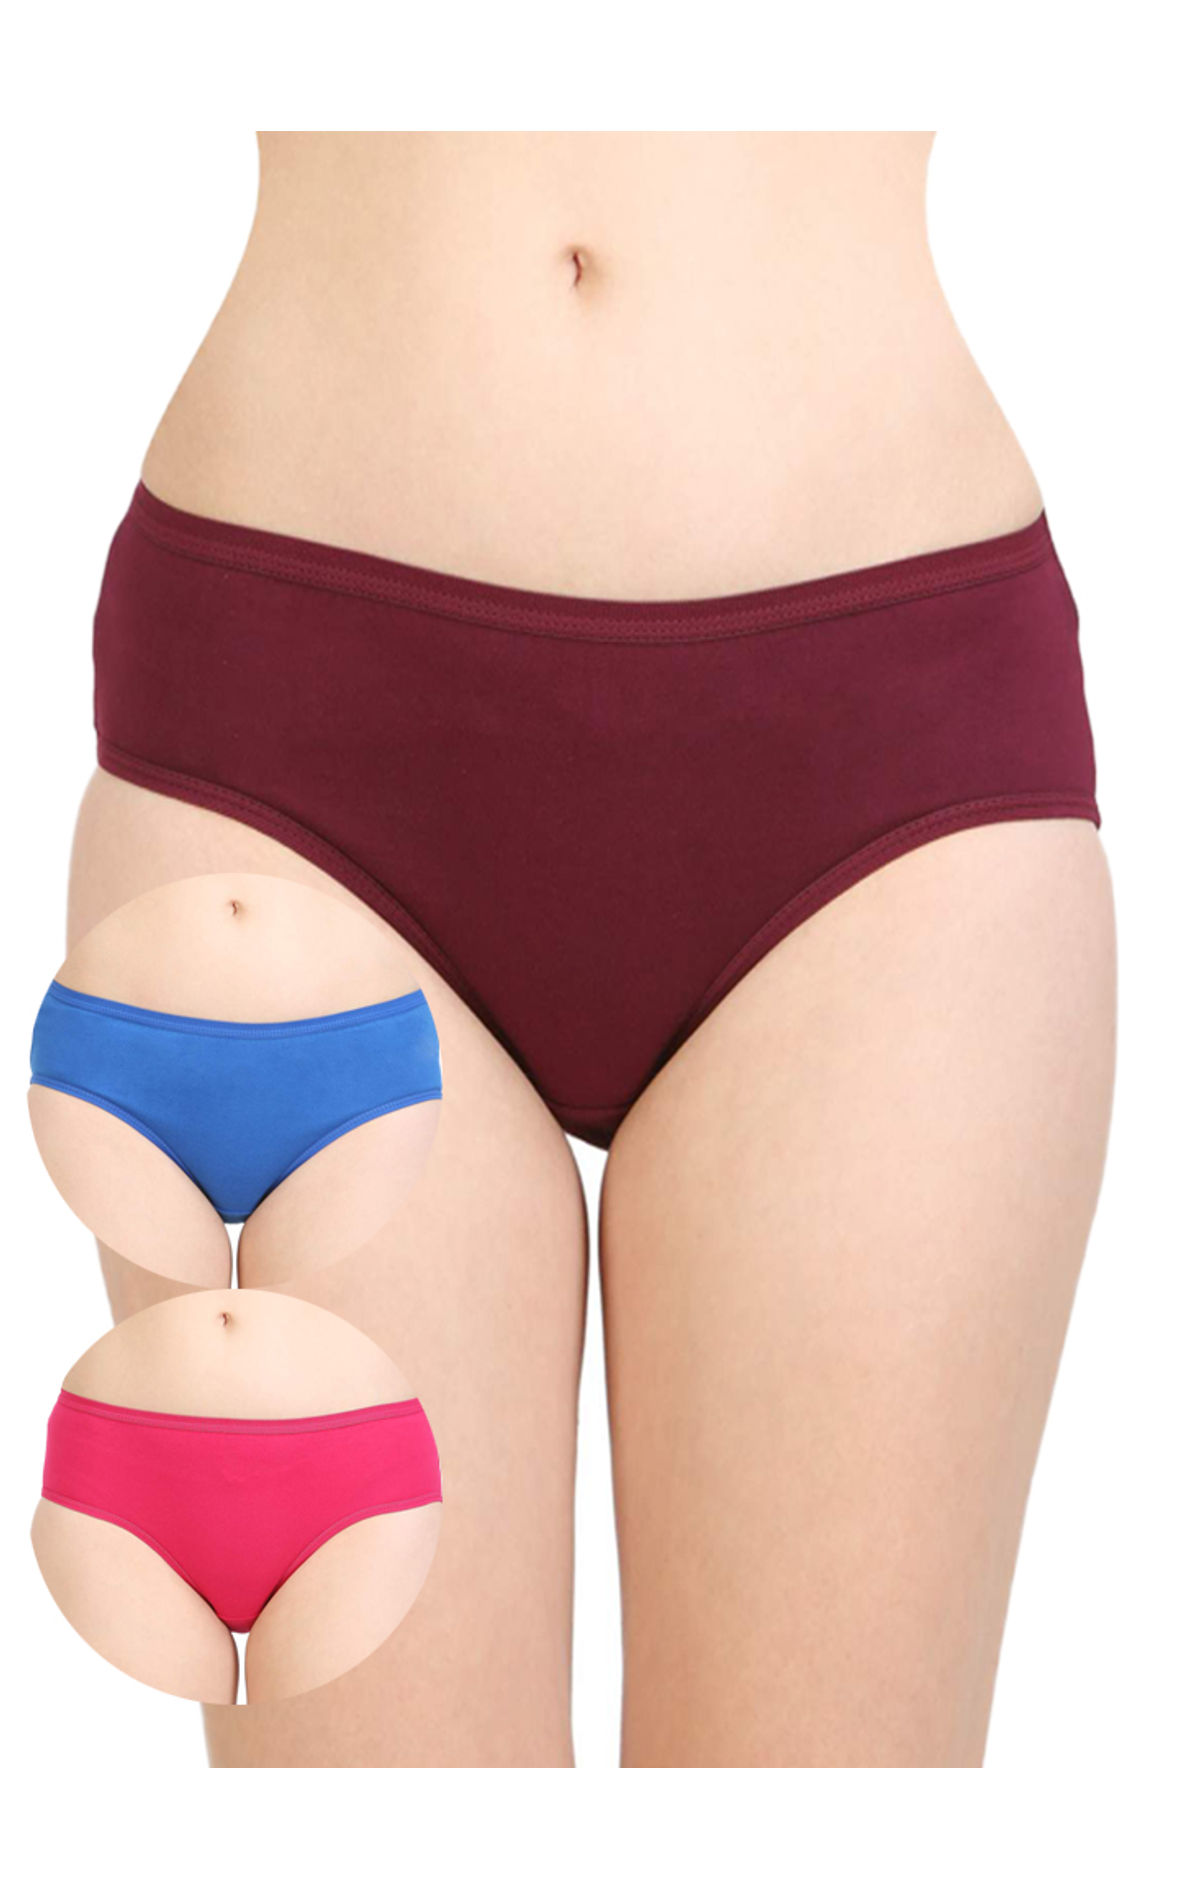 BODYCARE Women's Cotton Briefs (Pack of 3) Color May Vary